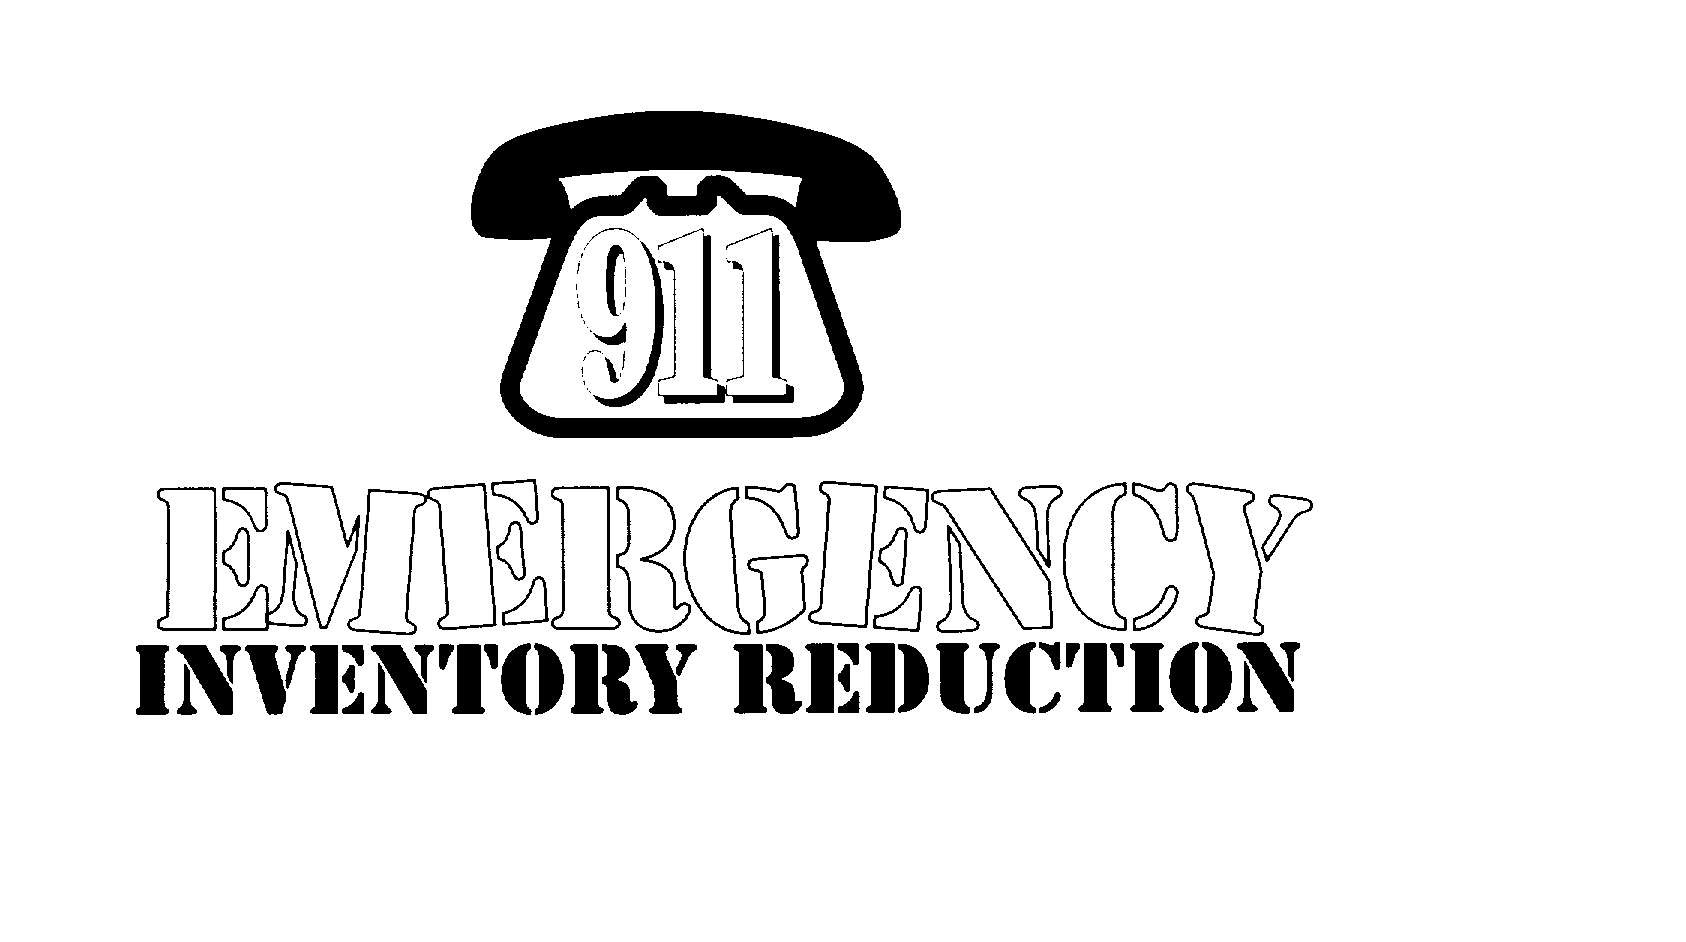  911 EMERGENCY INVENTORY REDUCTION